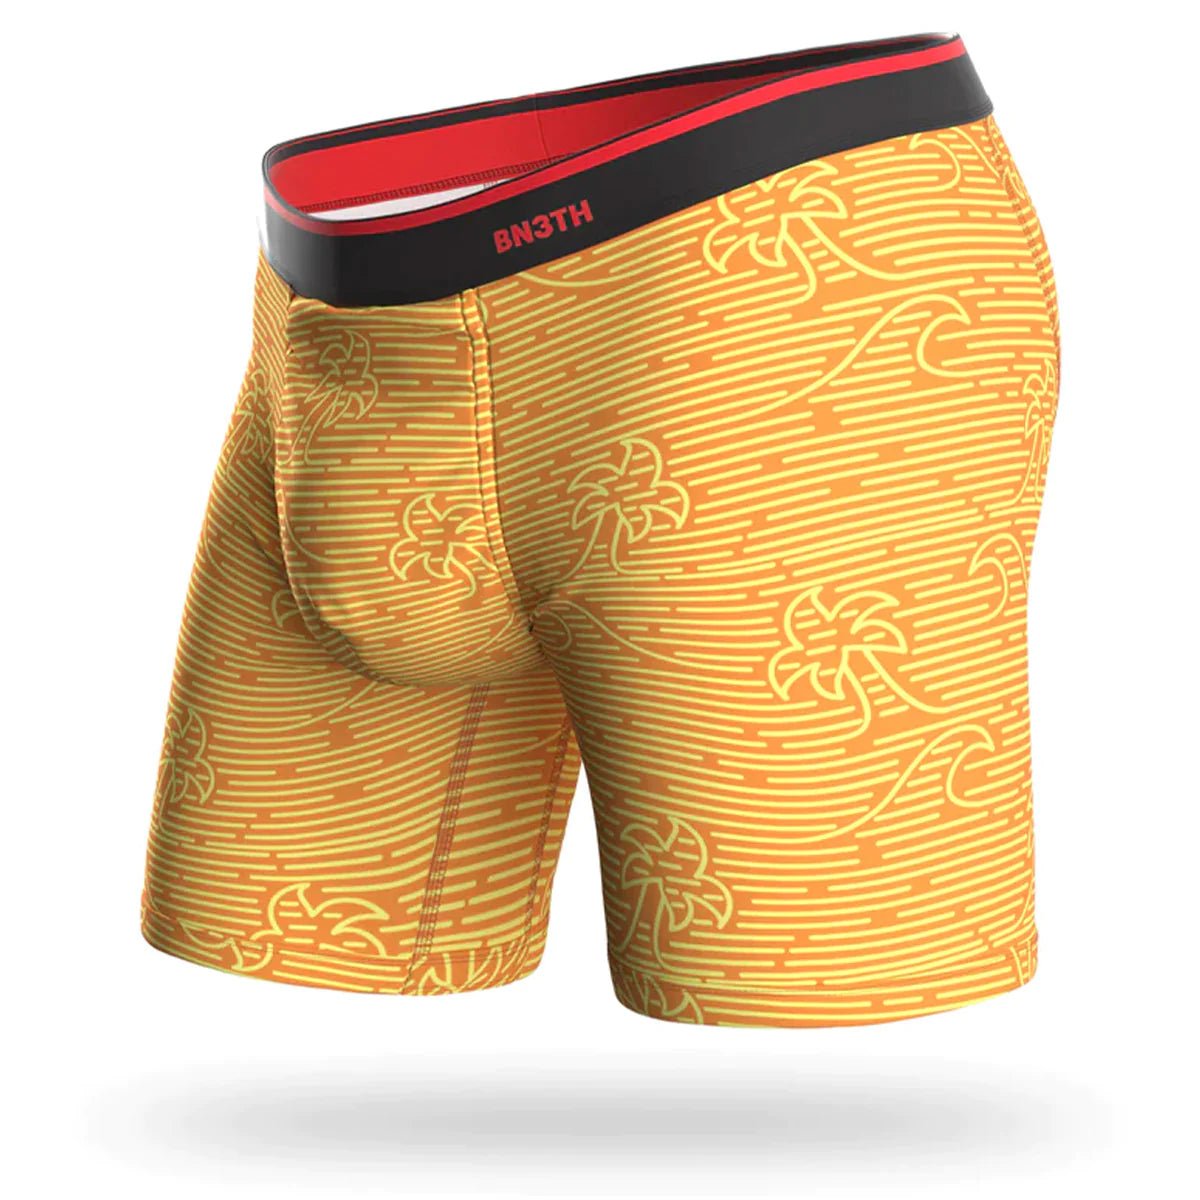 Bn3th - Classic Boxer Brief : Linear Wave Sun Baked